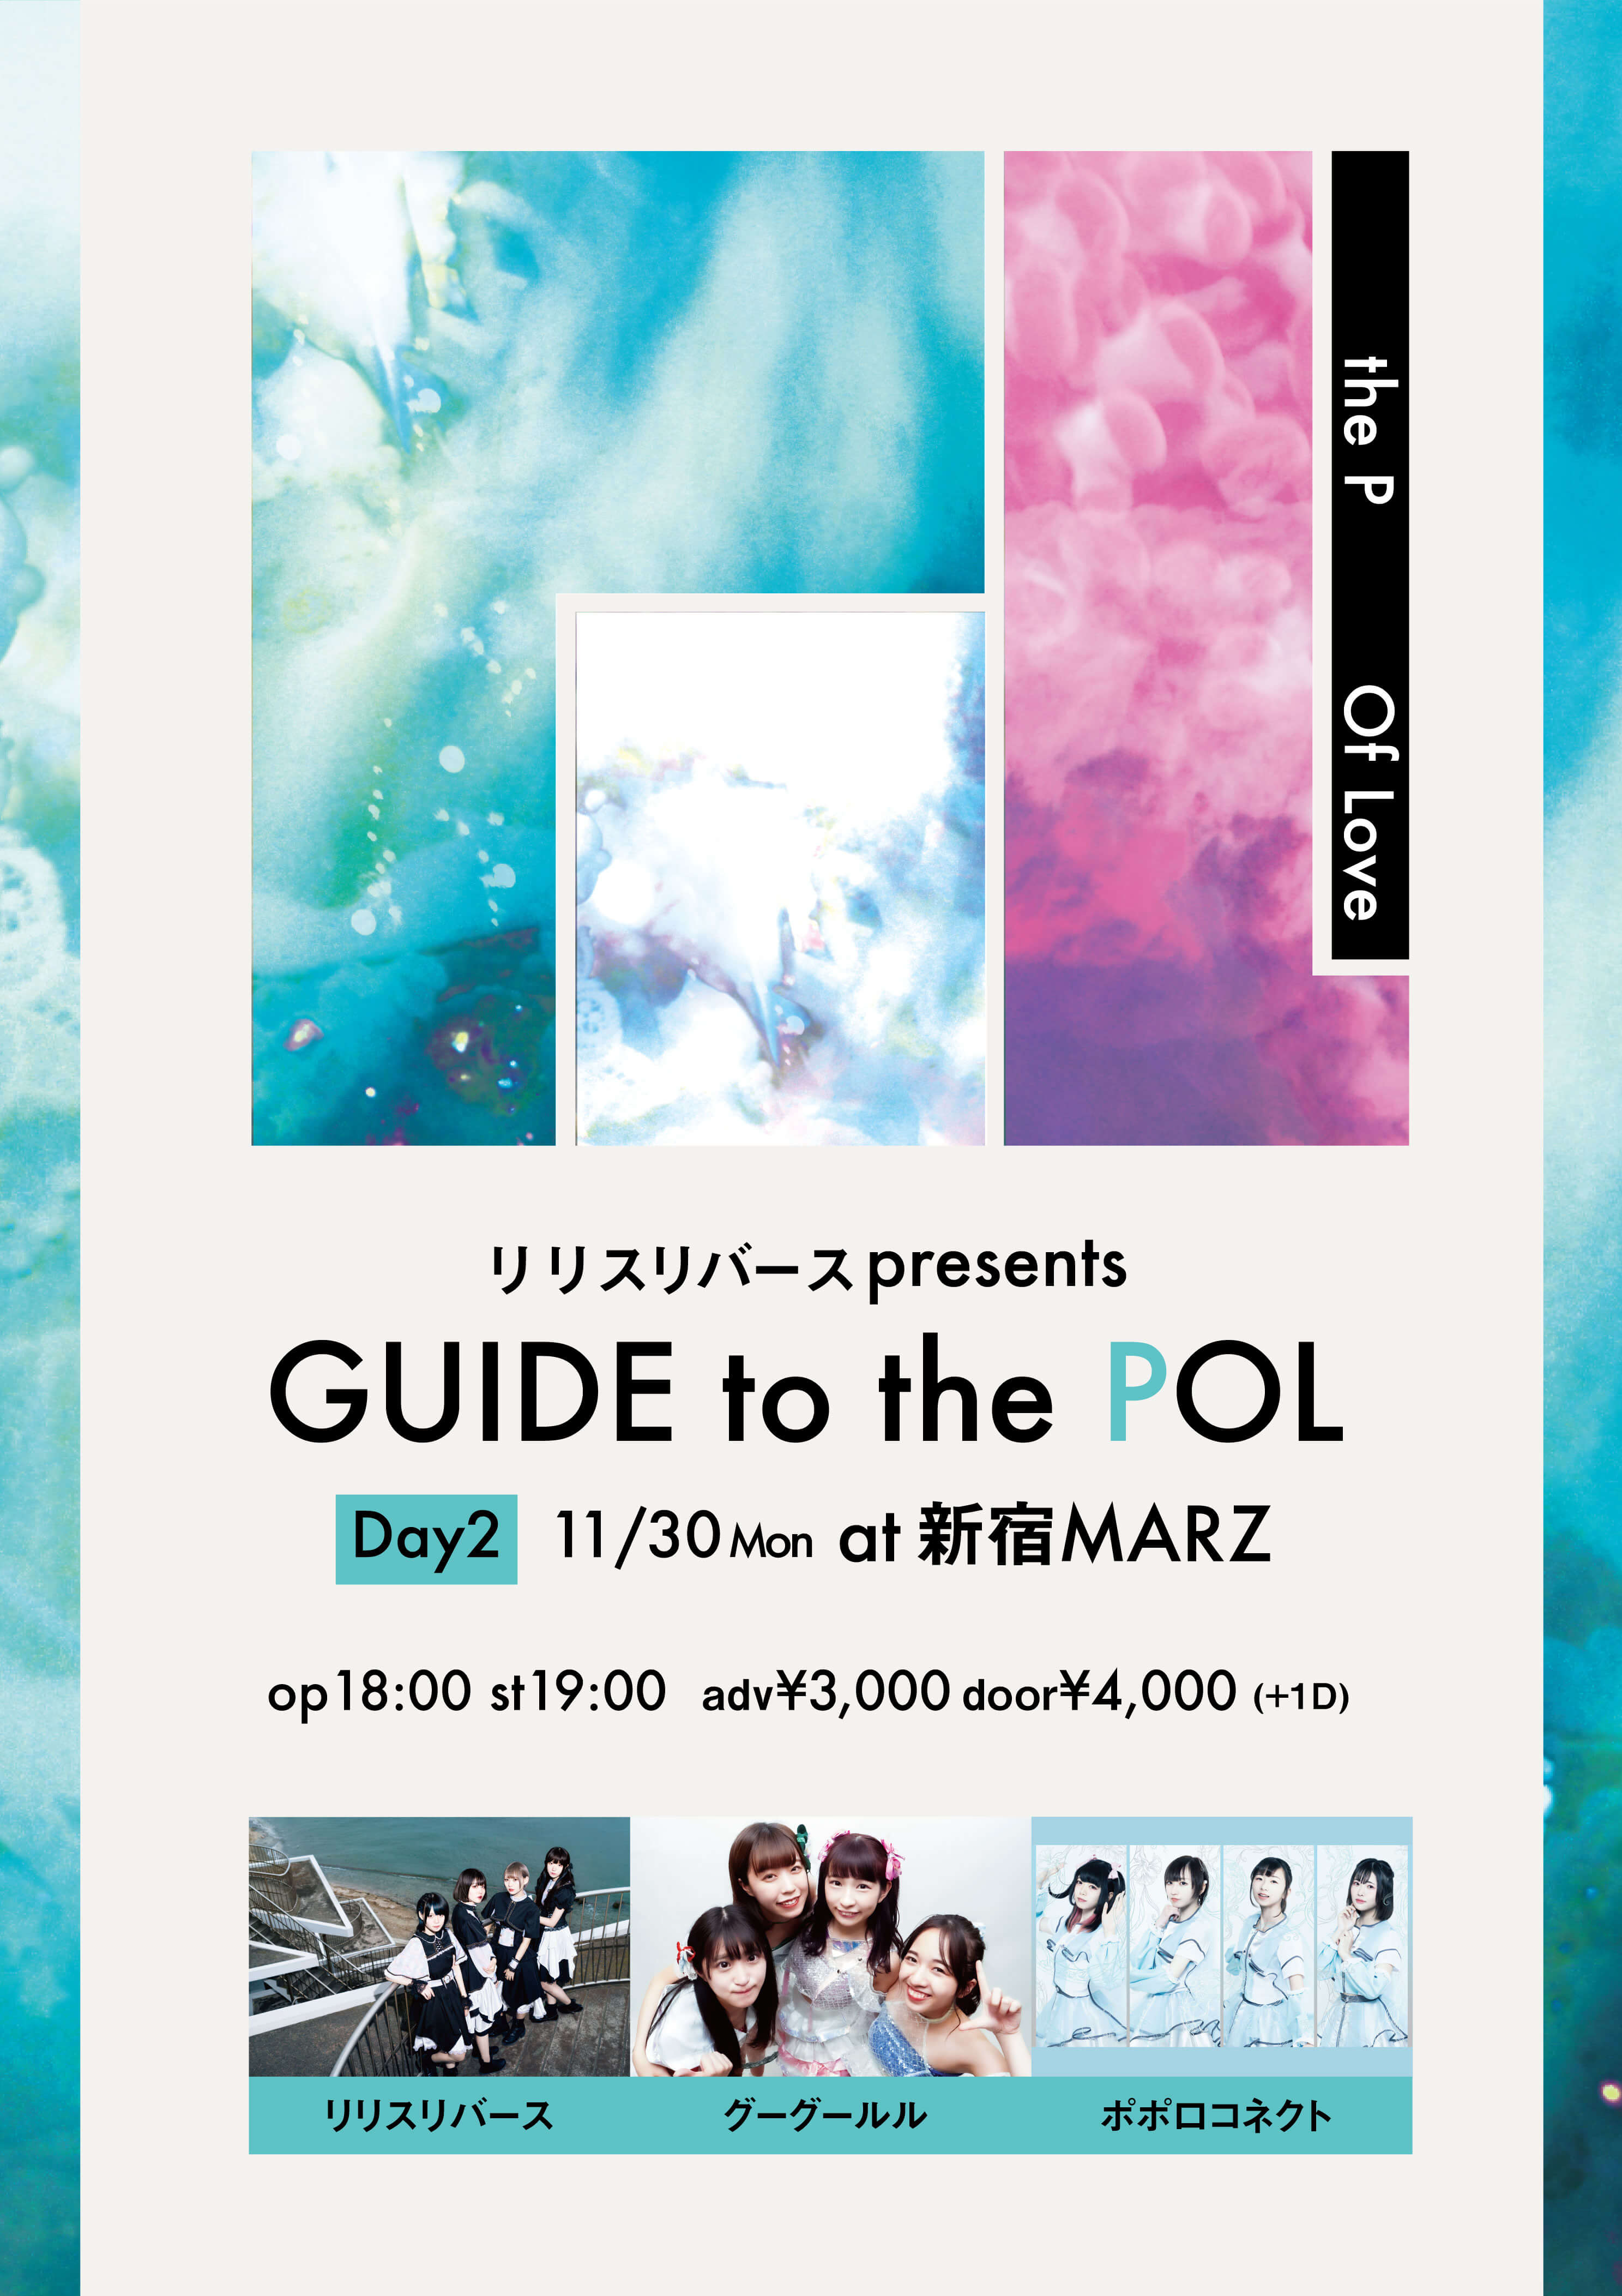 【Day2】リリスリバース presents 「GUIDE to the POL」